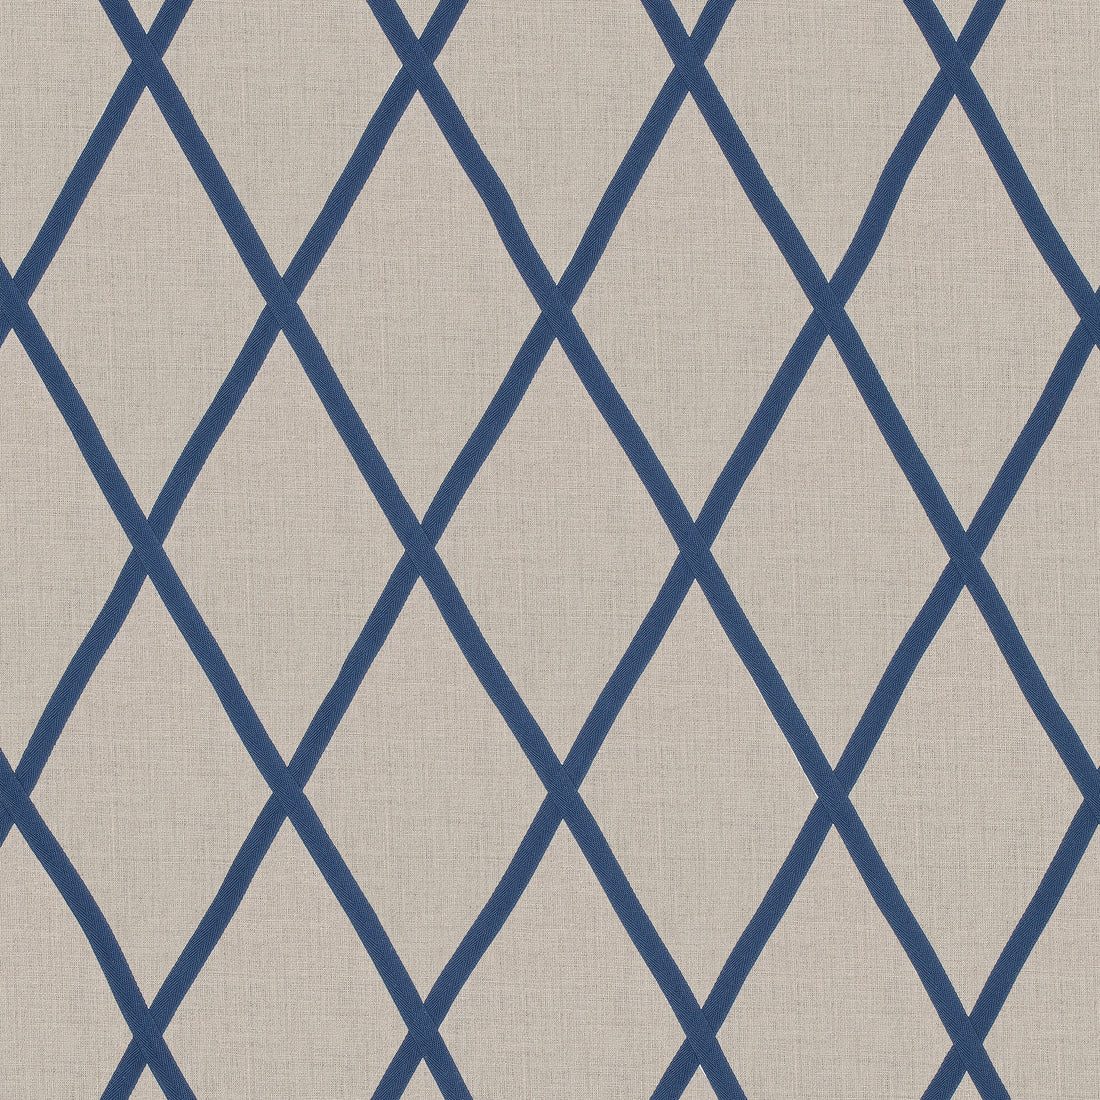 Tarascon Trellis Applique fabric in navy on natural color - pattern number AW78713 - by Anna French in the Palampore collection